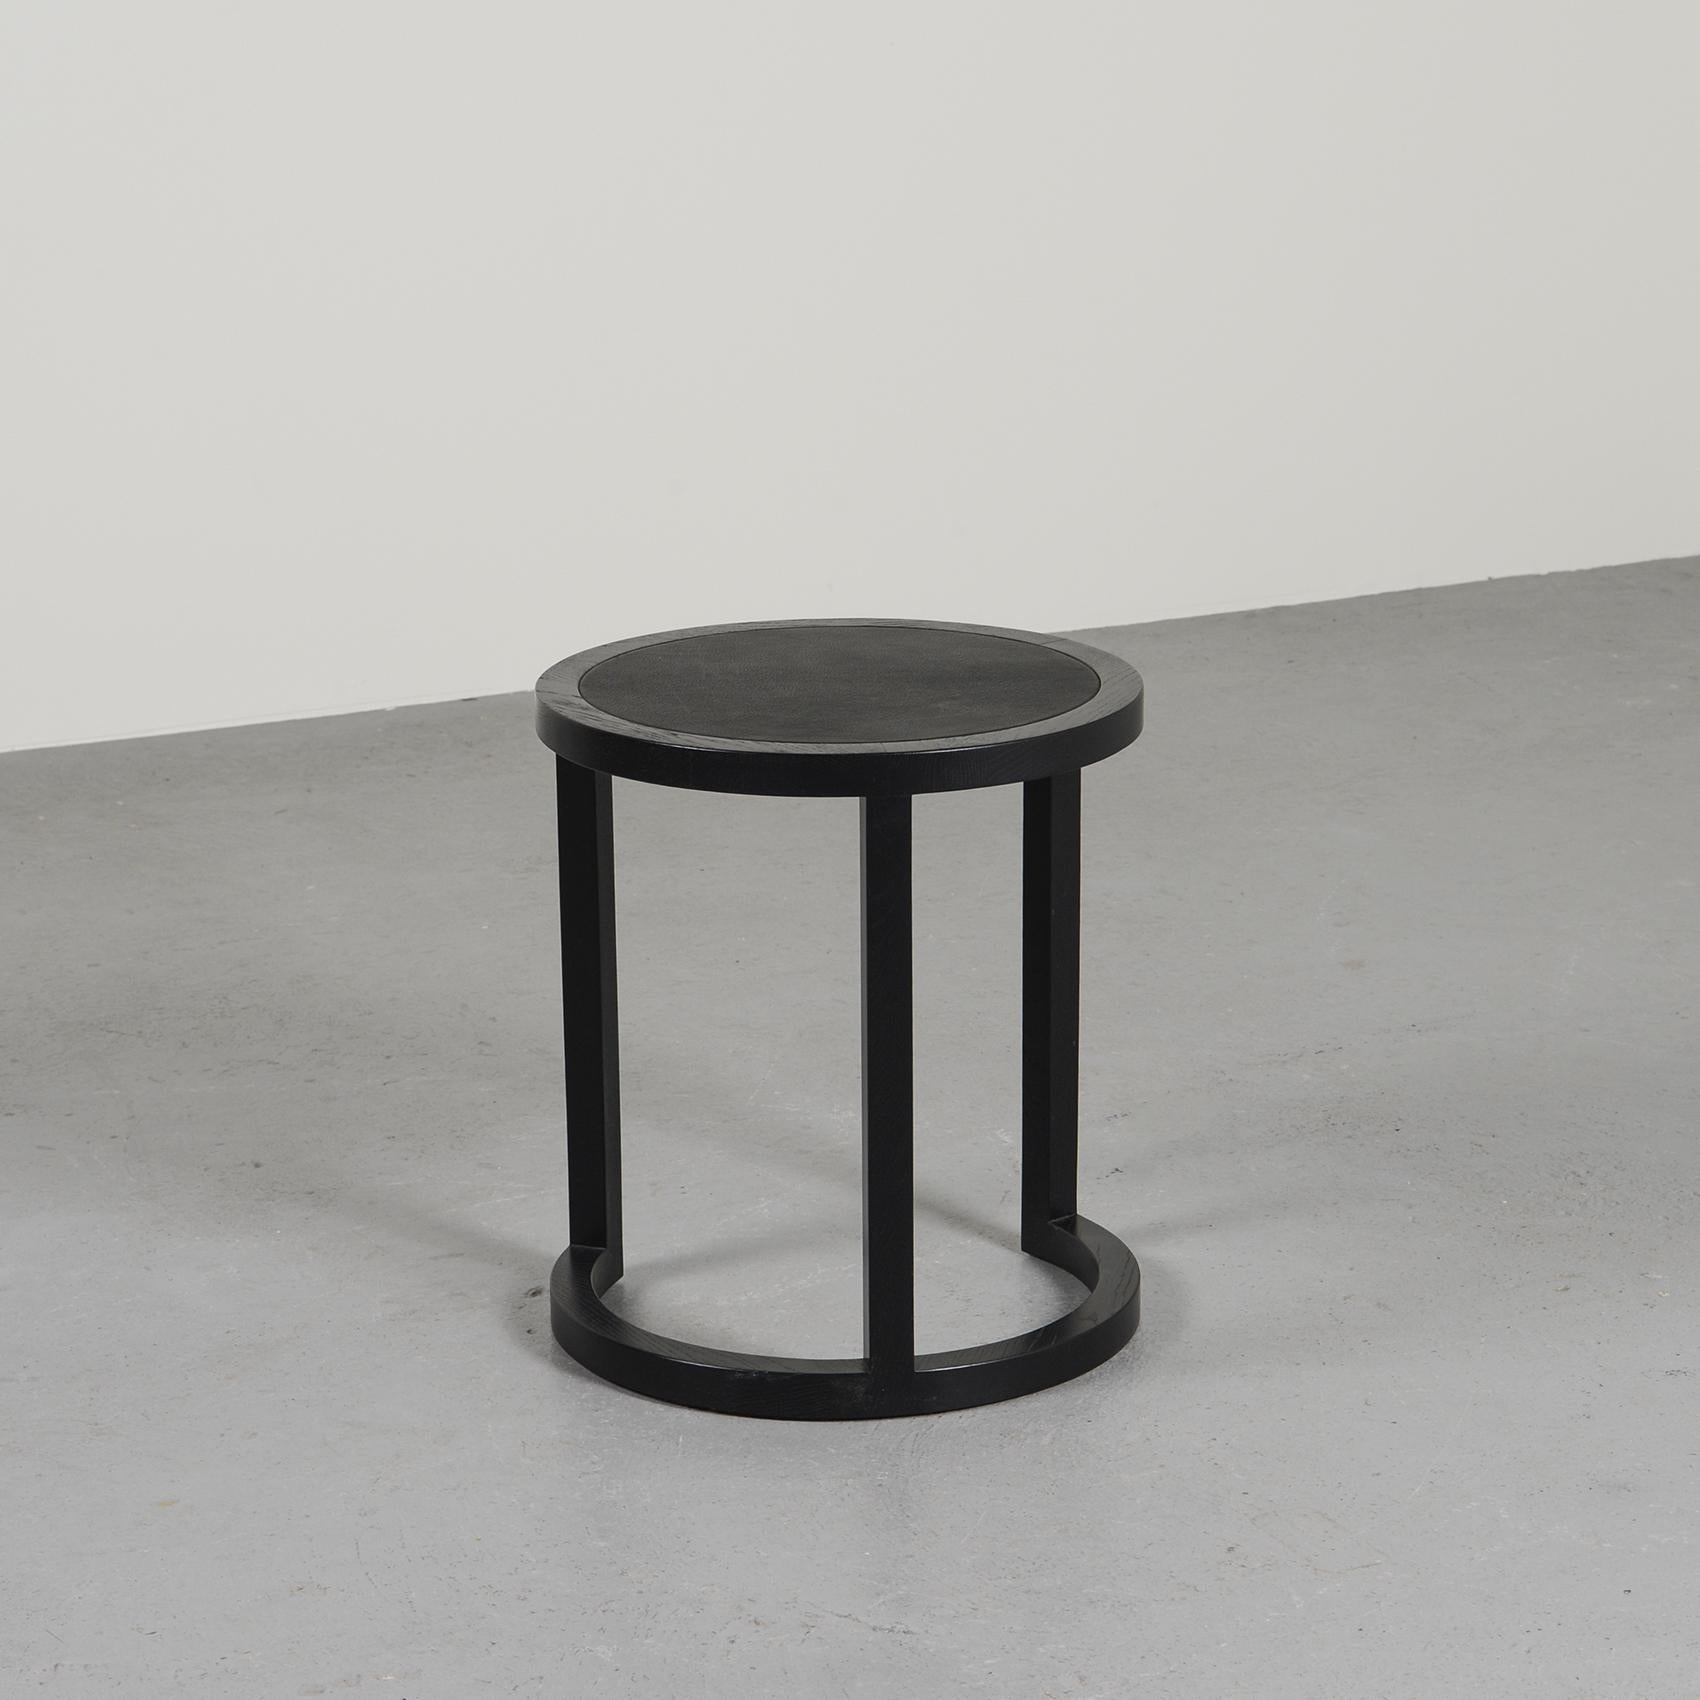 Limited Series Wood and Leather Nesting Tables by Stefan Zwicky for De Sede For Sale 4